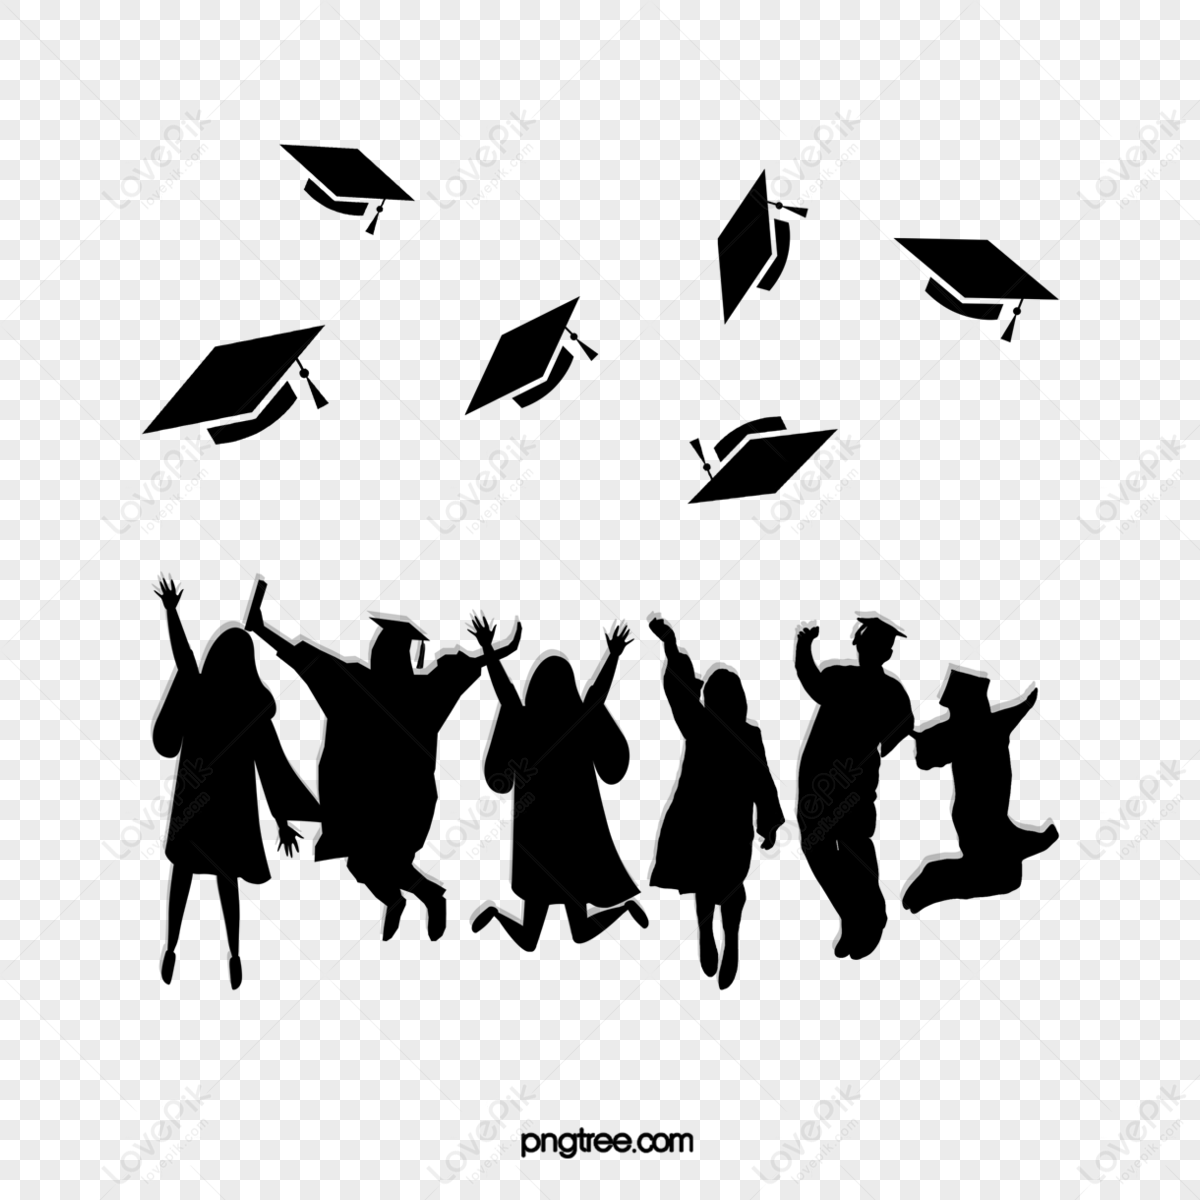 Simple Graduates Throwing Black Silhouettes Of Bachelors Caps ...